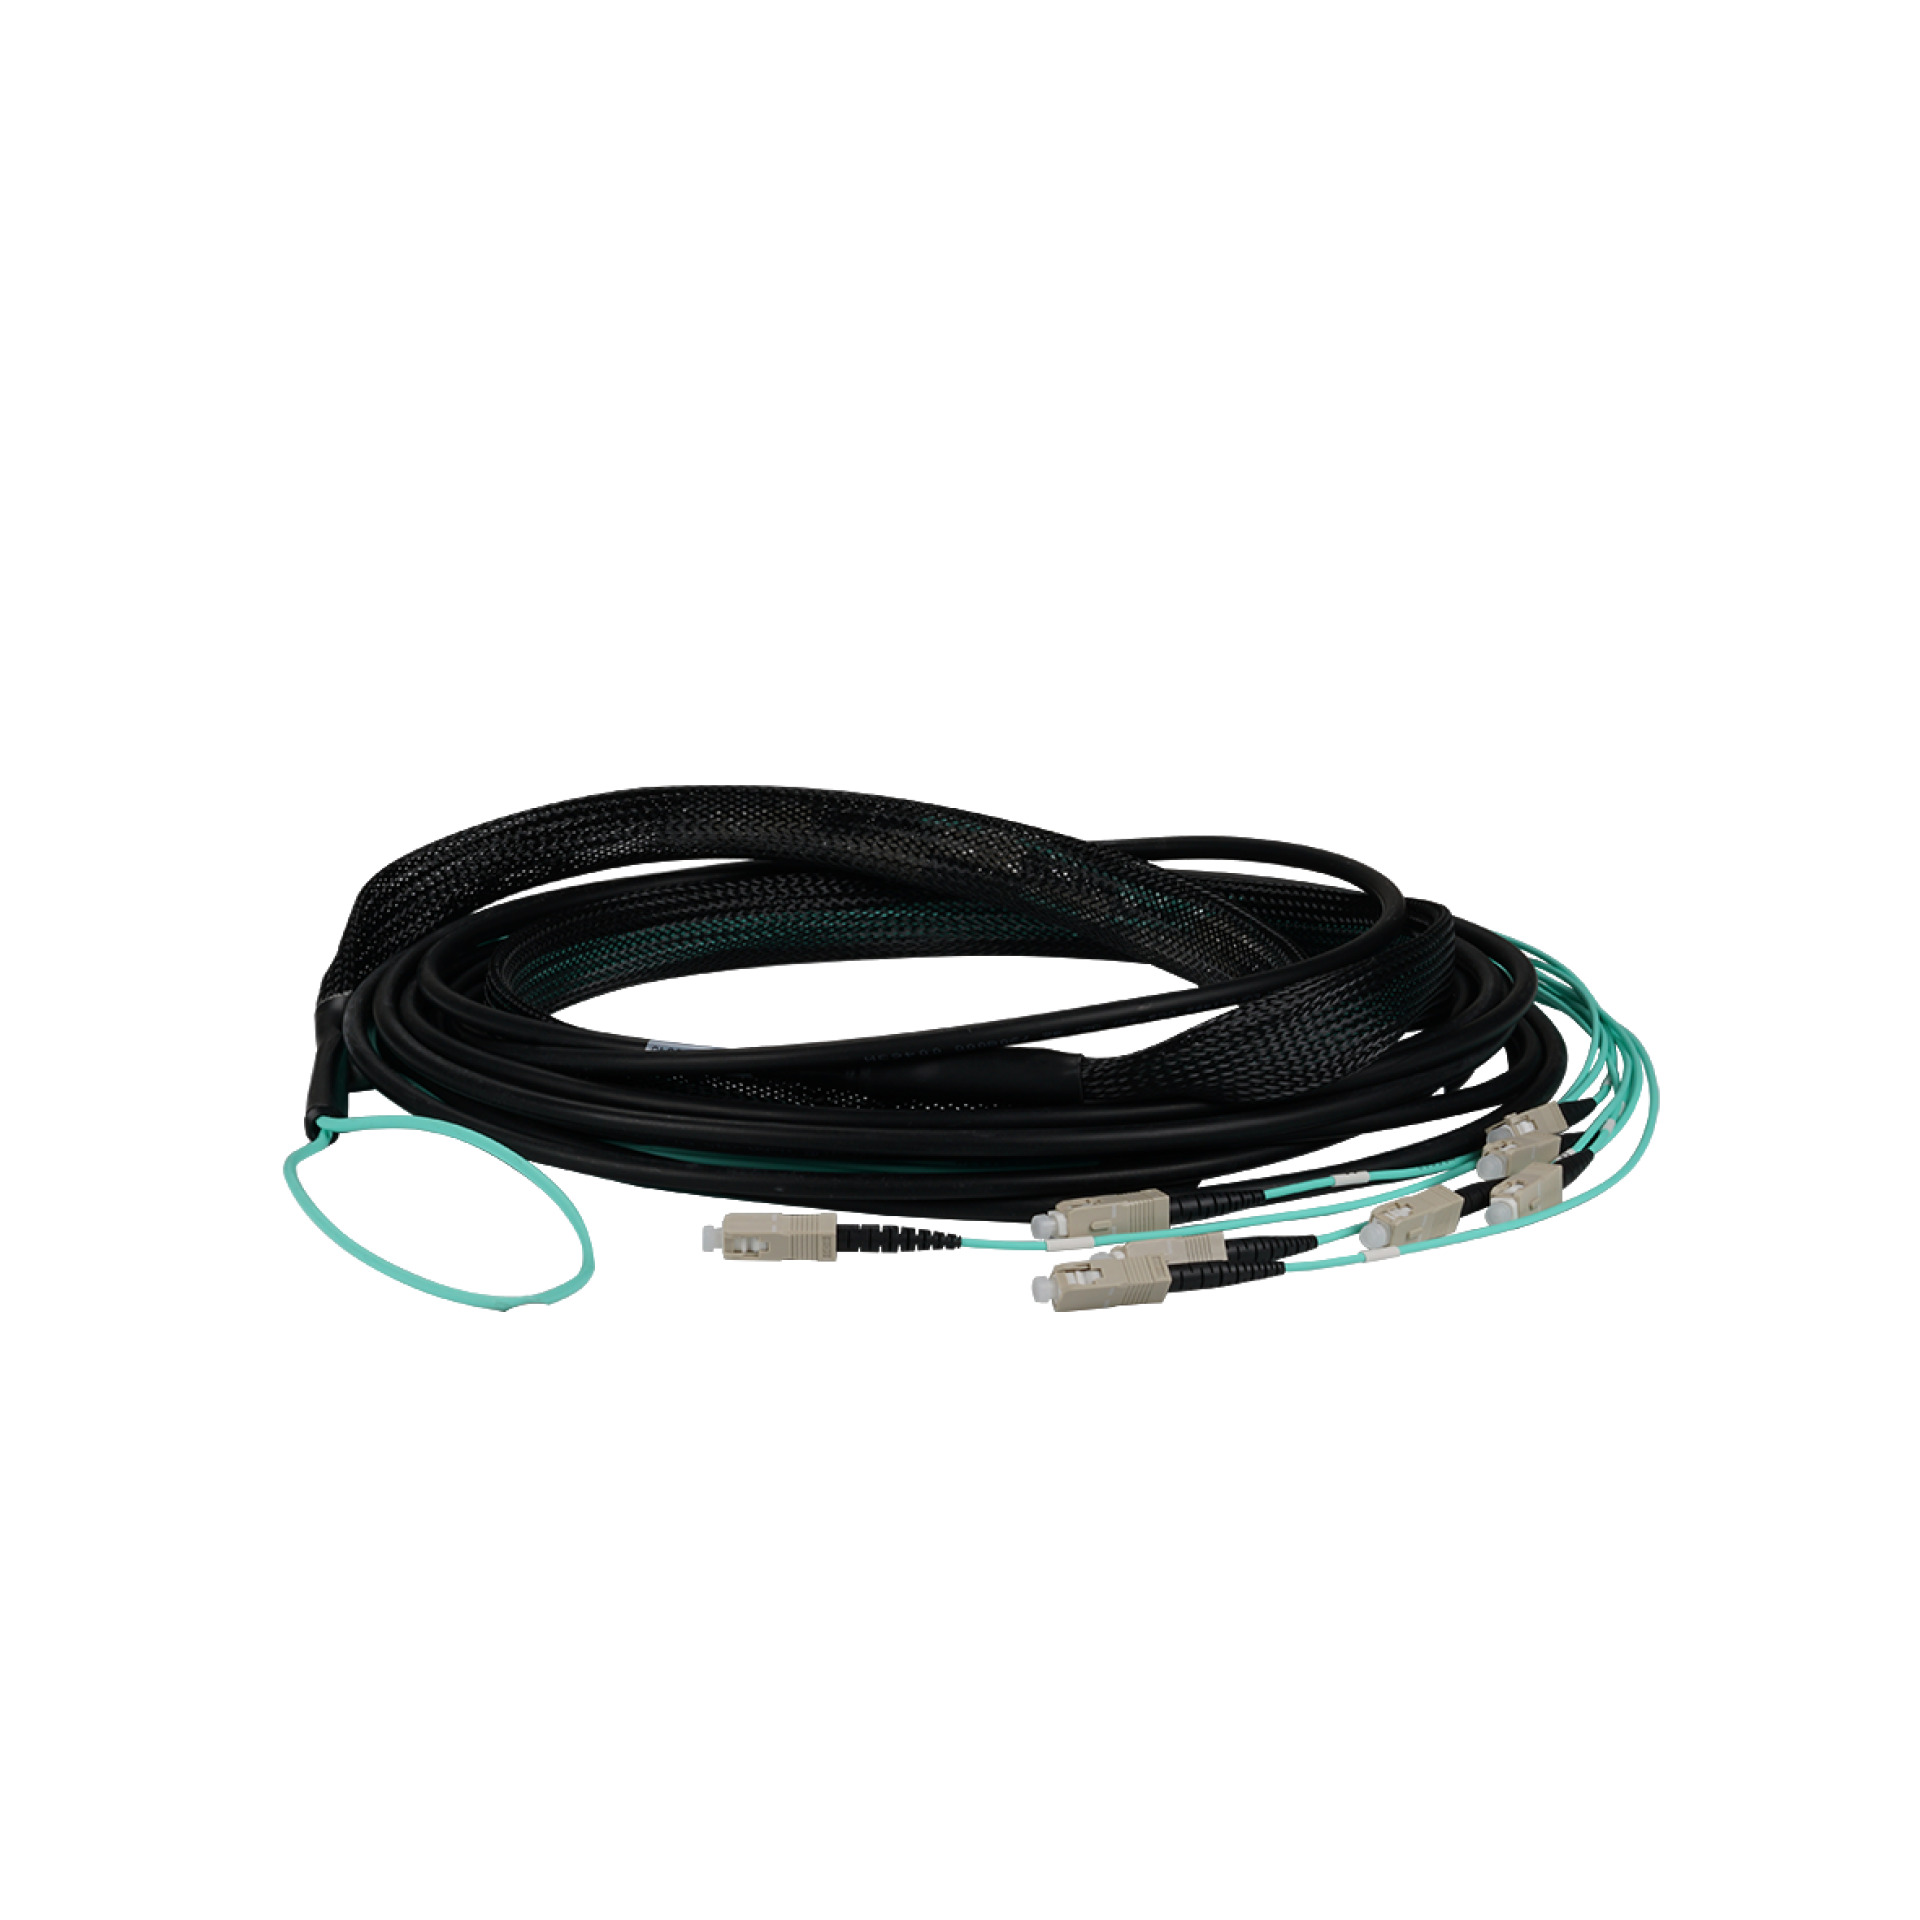 Trunk cable U-DQ(ZN)BH 4G 50/125, SC/SC OM3 170m